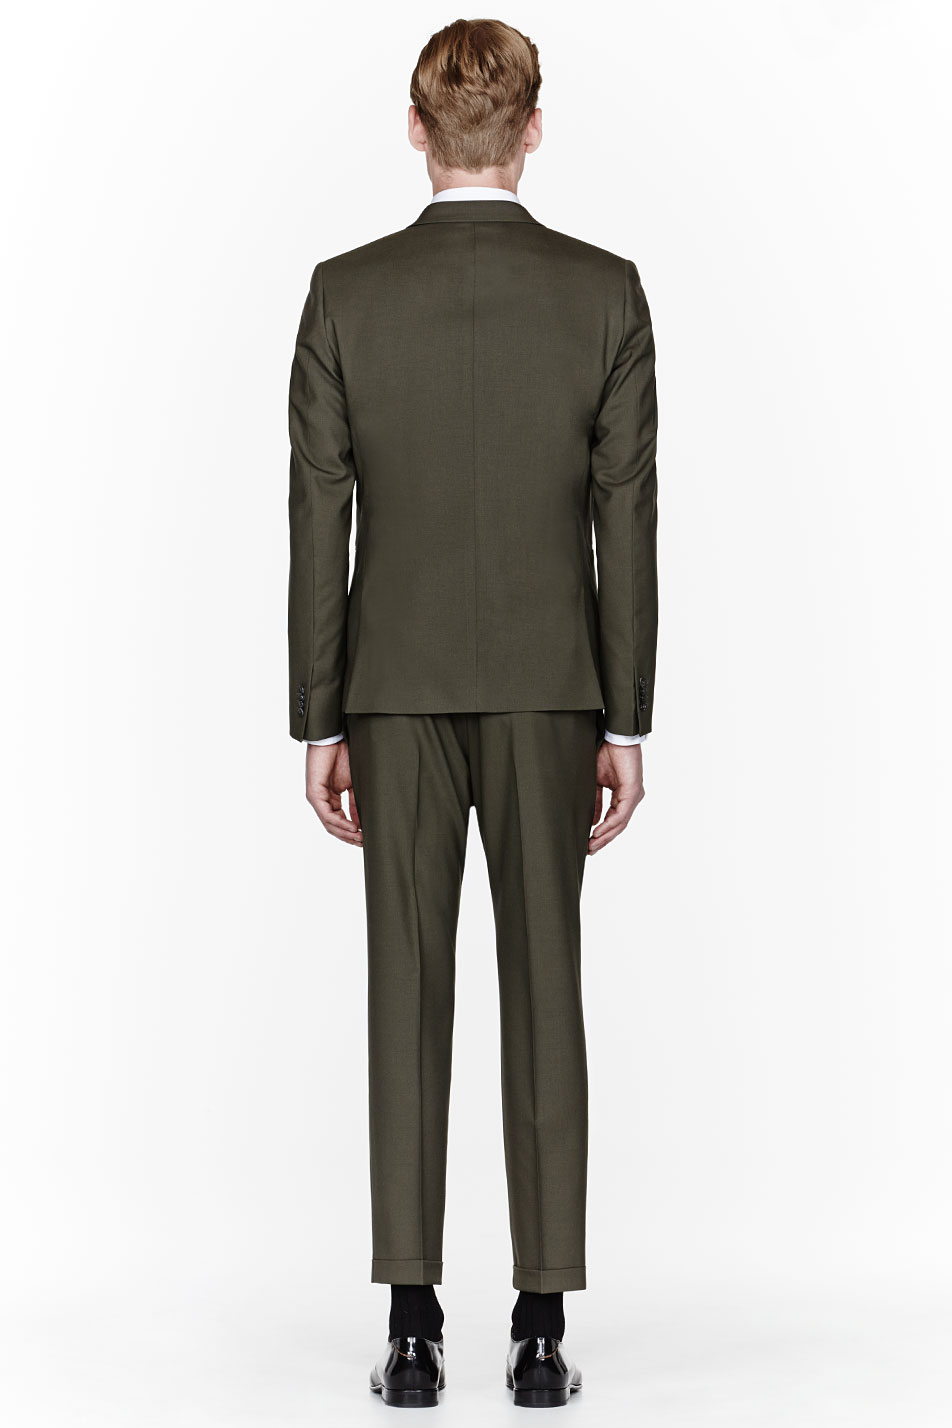 Paul Smith Olive Green Suit for Men - Lyst